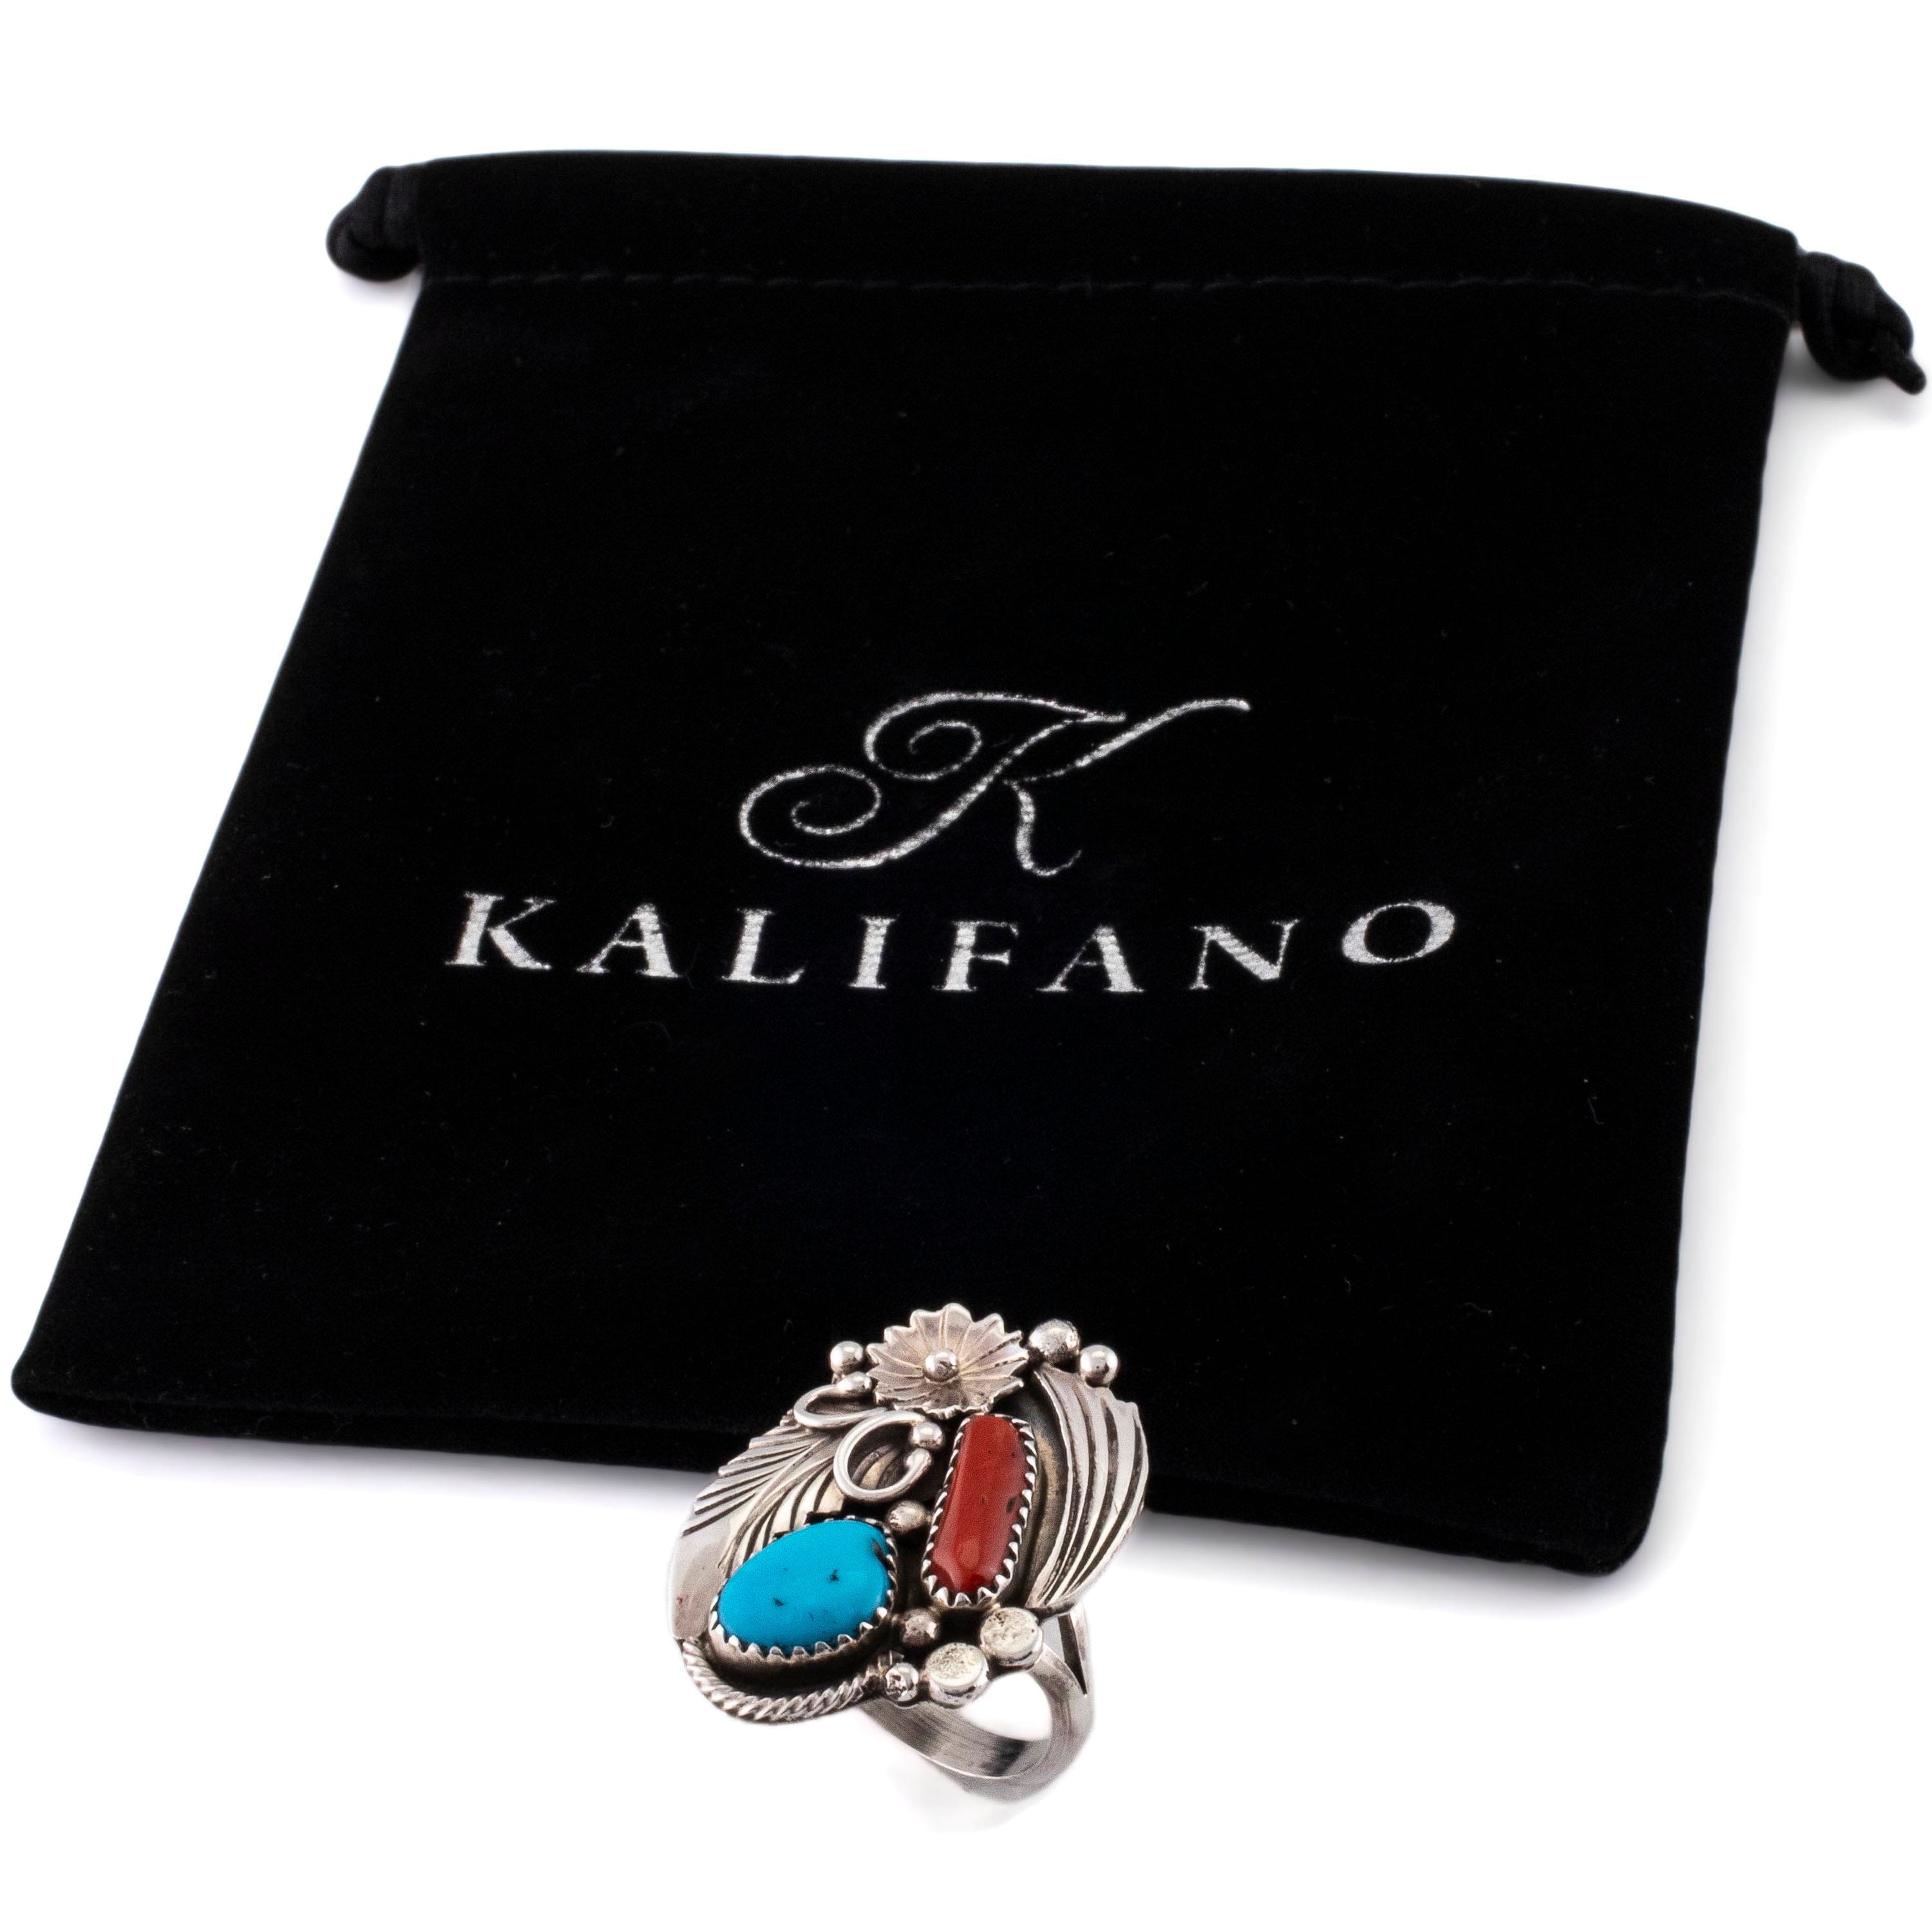 Kalifano Native American Jewelry 8 Sleeping Beauty Turquoise and Coral USA Native American Made 925 Sterling Silver Ring NAR500.066.8